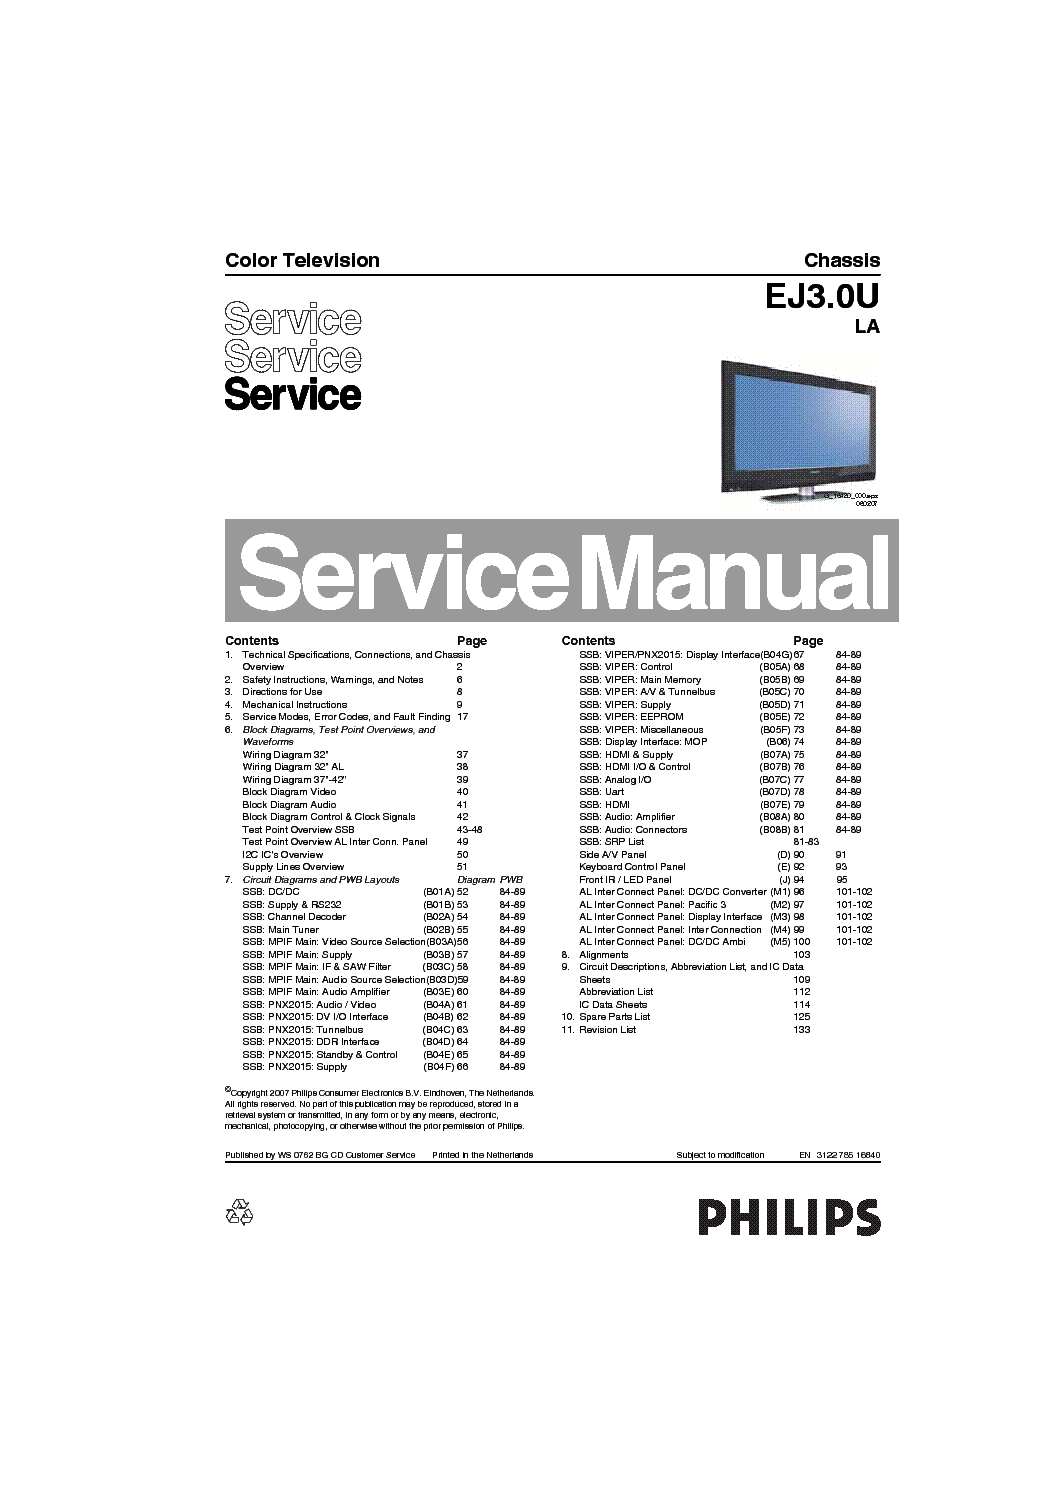 PHILIPS 32PFL5332 CHASSIS EJ3 0U LCD TV service manual (1st page)